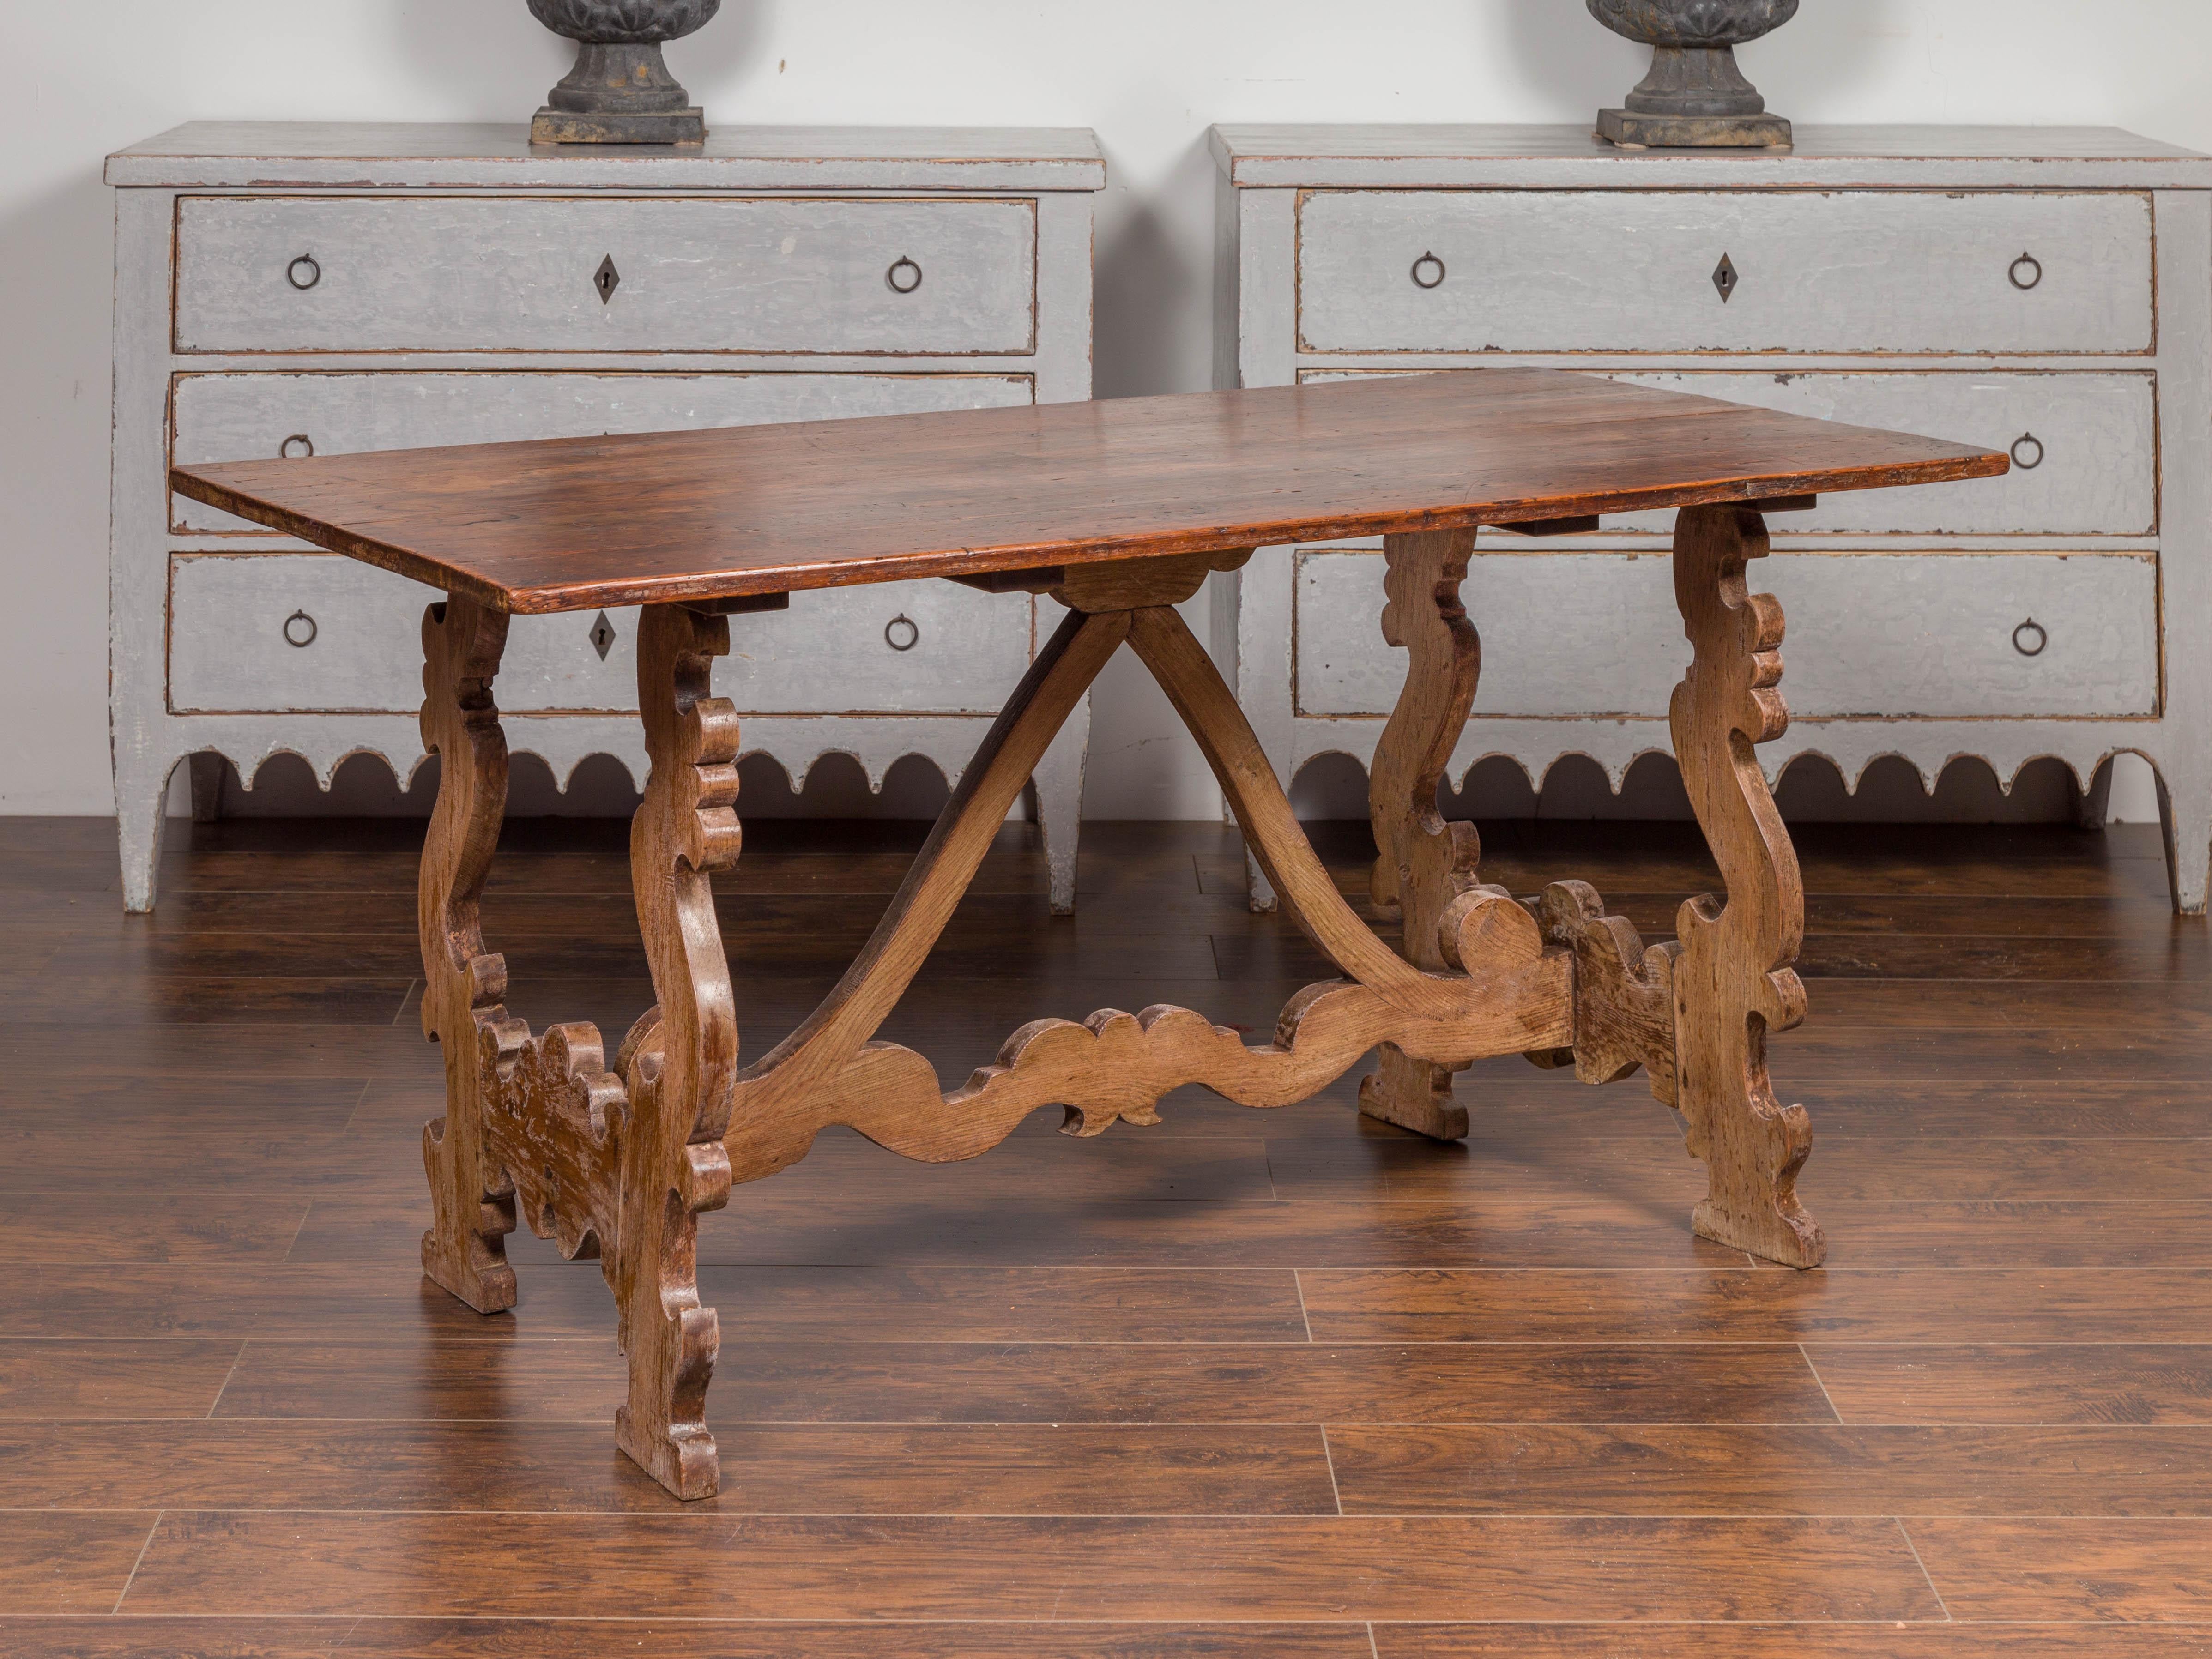 This Spanish Fratino console table from the mid-19th century features a rectangular top with beautiful patina over a baroque style trestle base. Two lyre-shaped legs are connected to one another as well as the table top via a beautifully carved